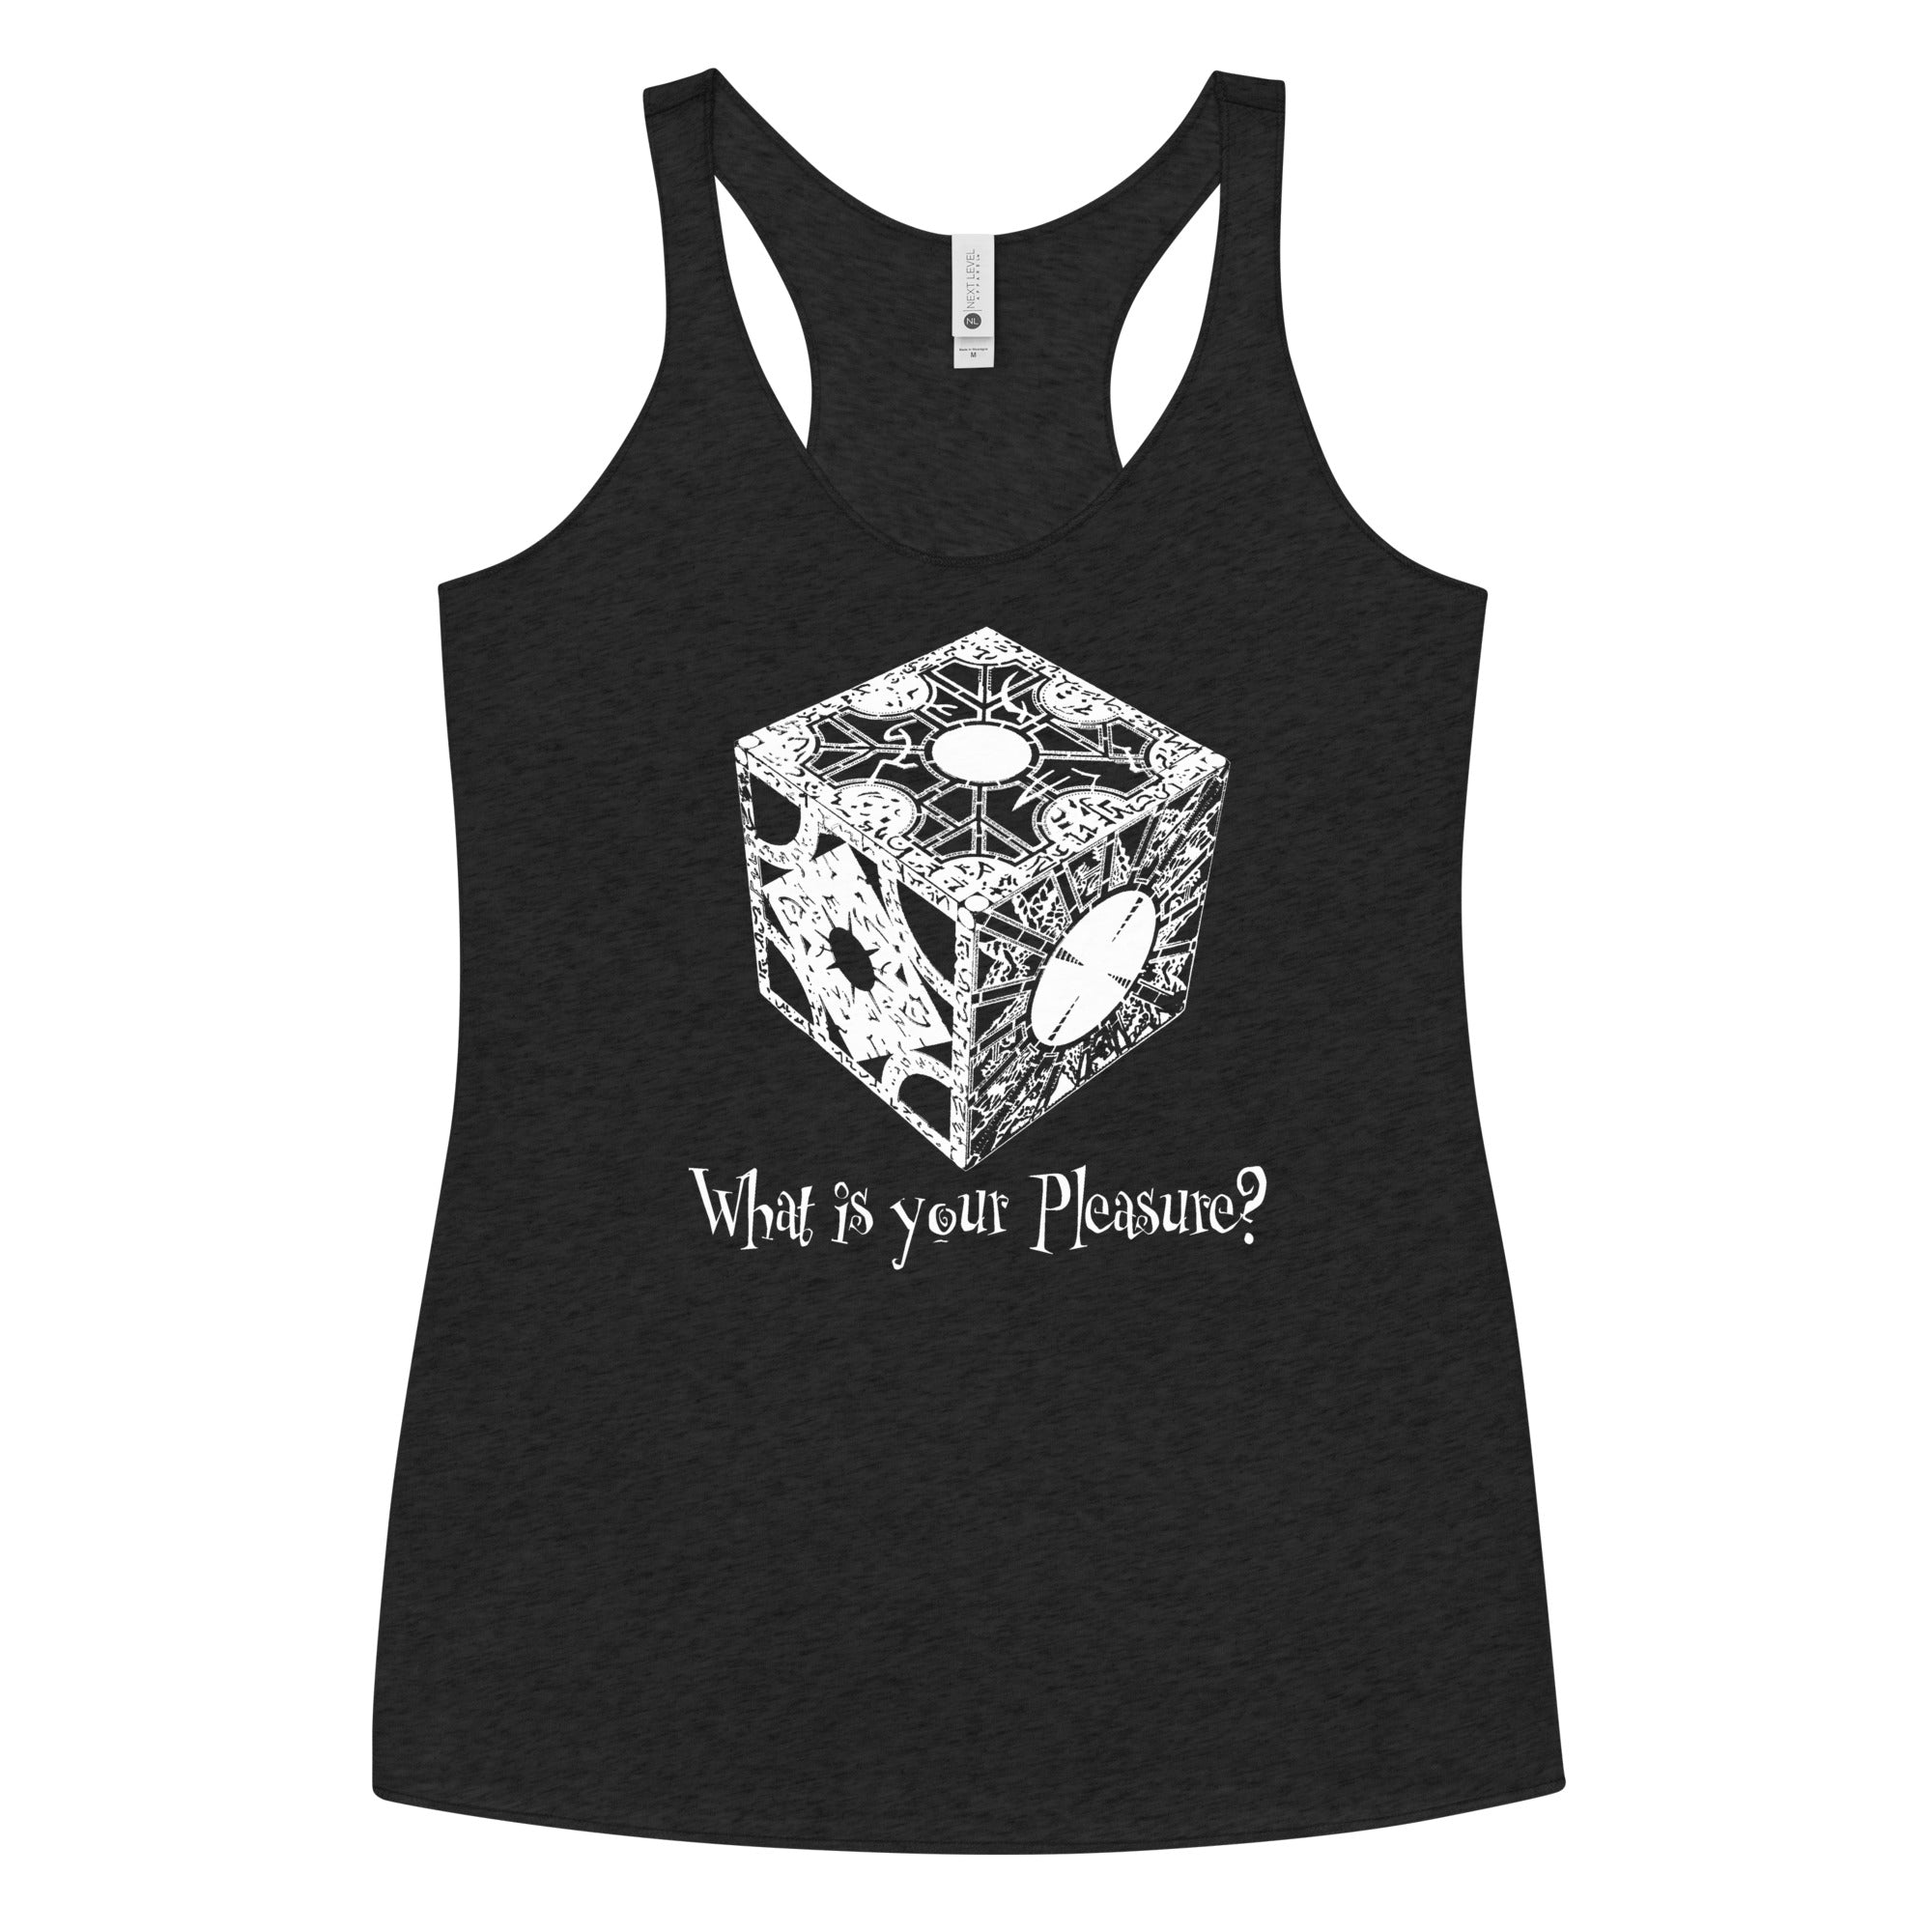 Puzzle Box - What is your Pleasure? Women's Racerback Tank Top Shirt - Edge of Life Designs